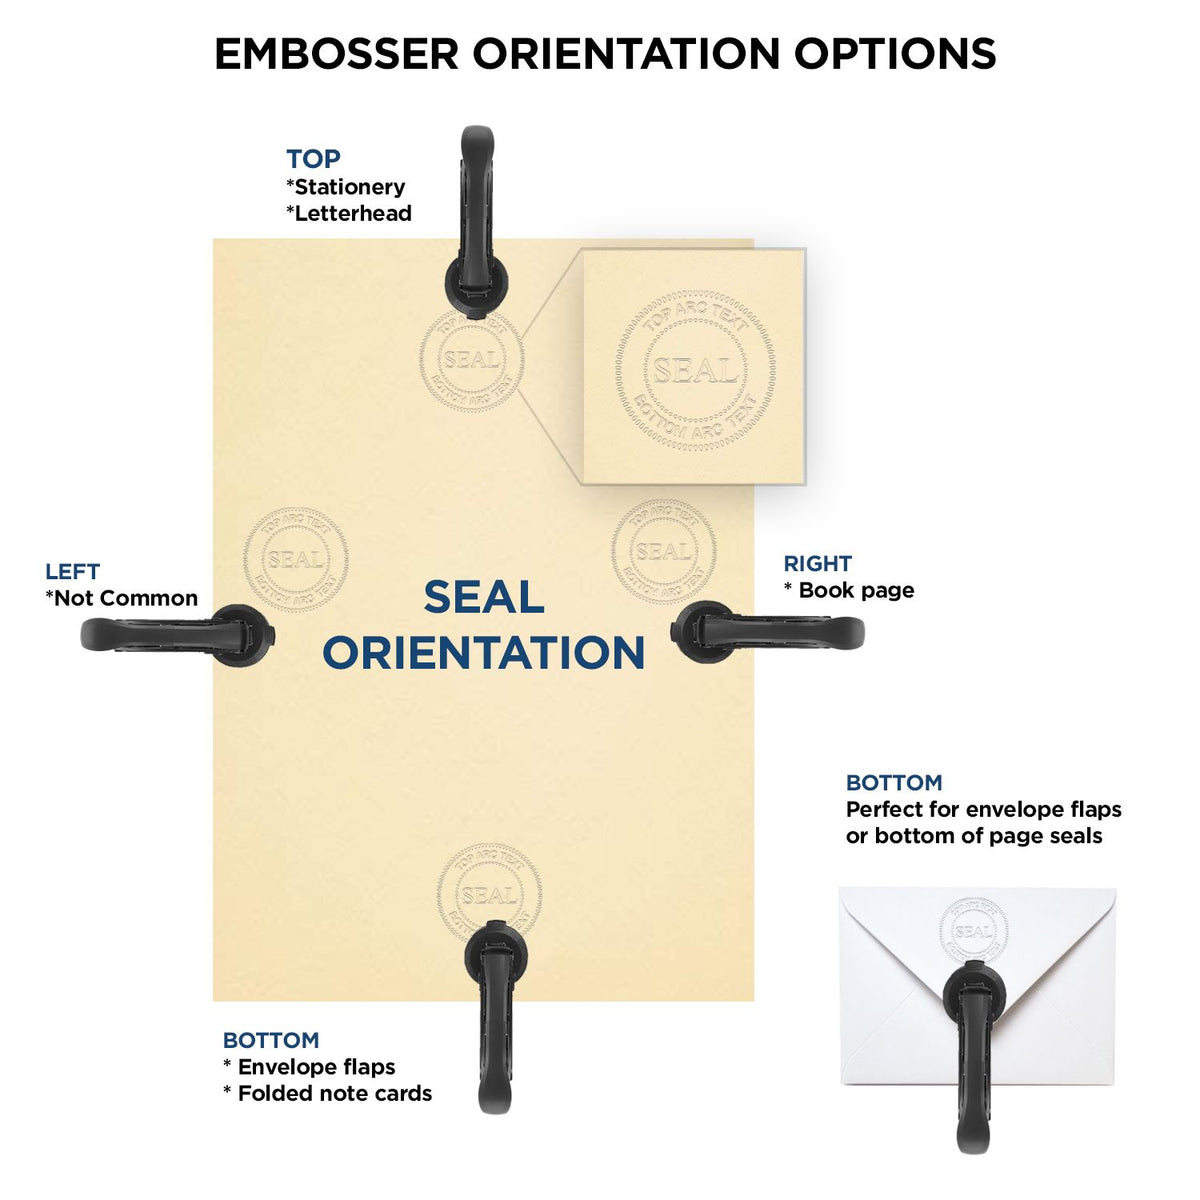 An infographic for the Heavy Duty Cast Iron Idaho Land Surveyor Seal Embosser showing embosser orientation, this is showing examples of a top, bottom, right and left insert.